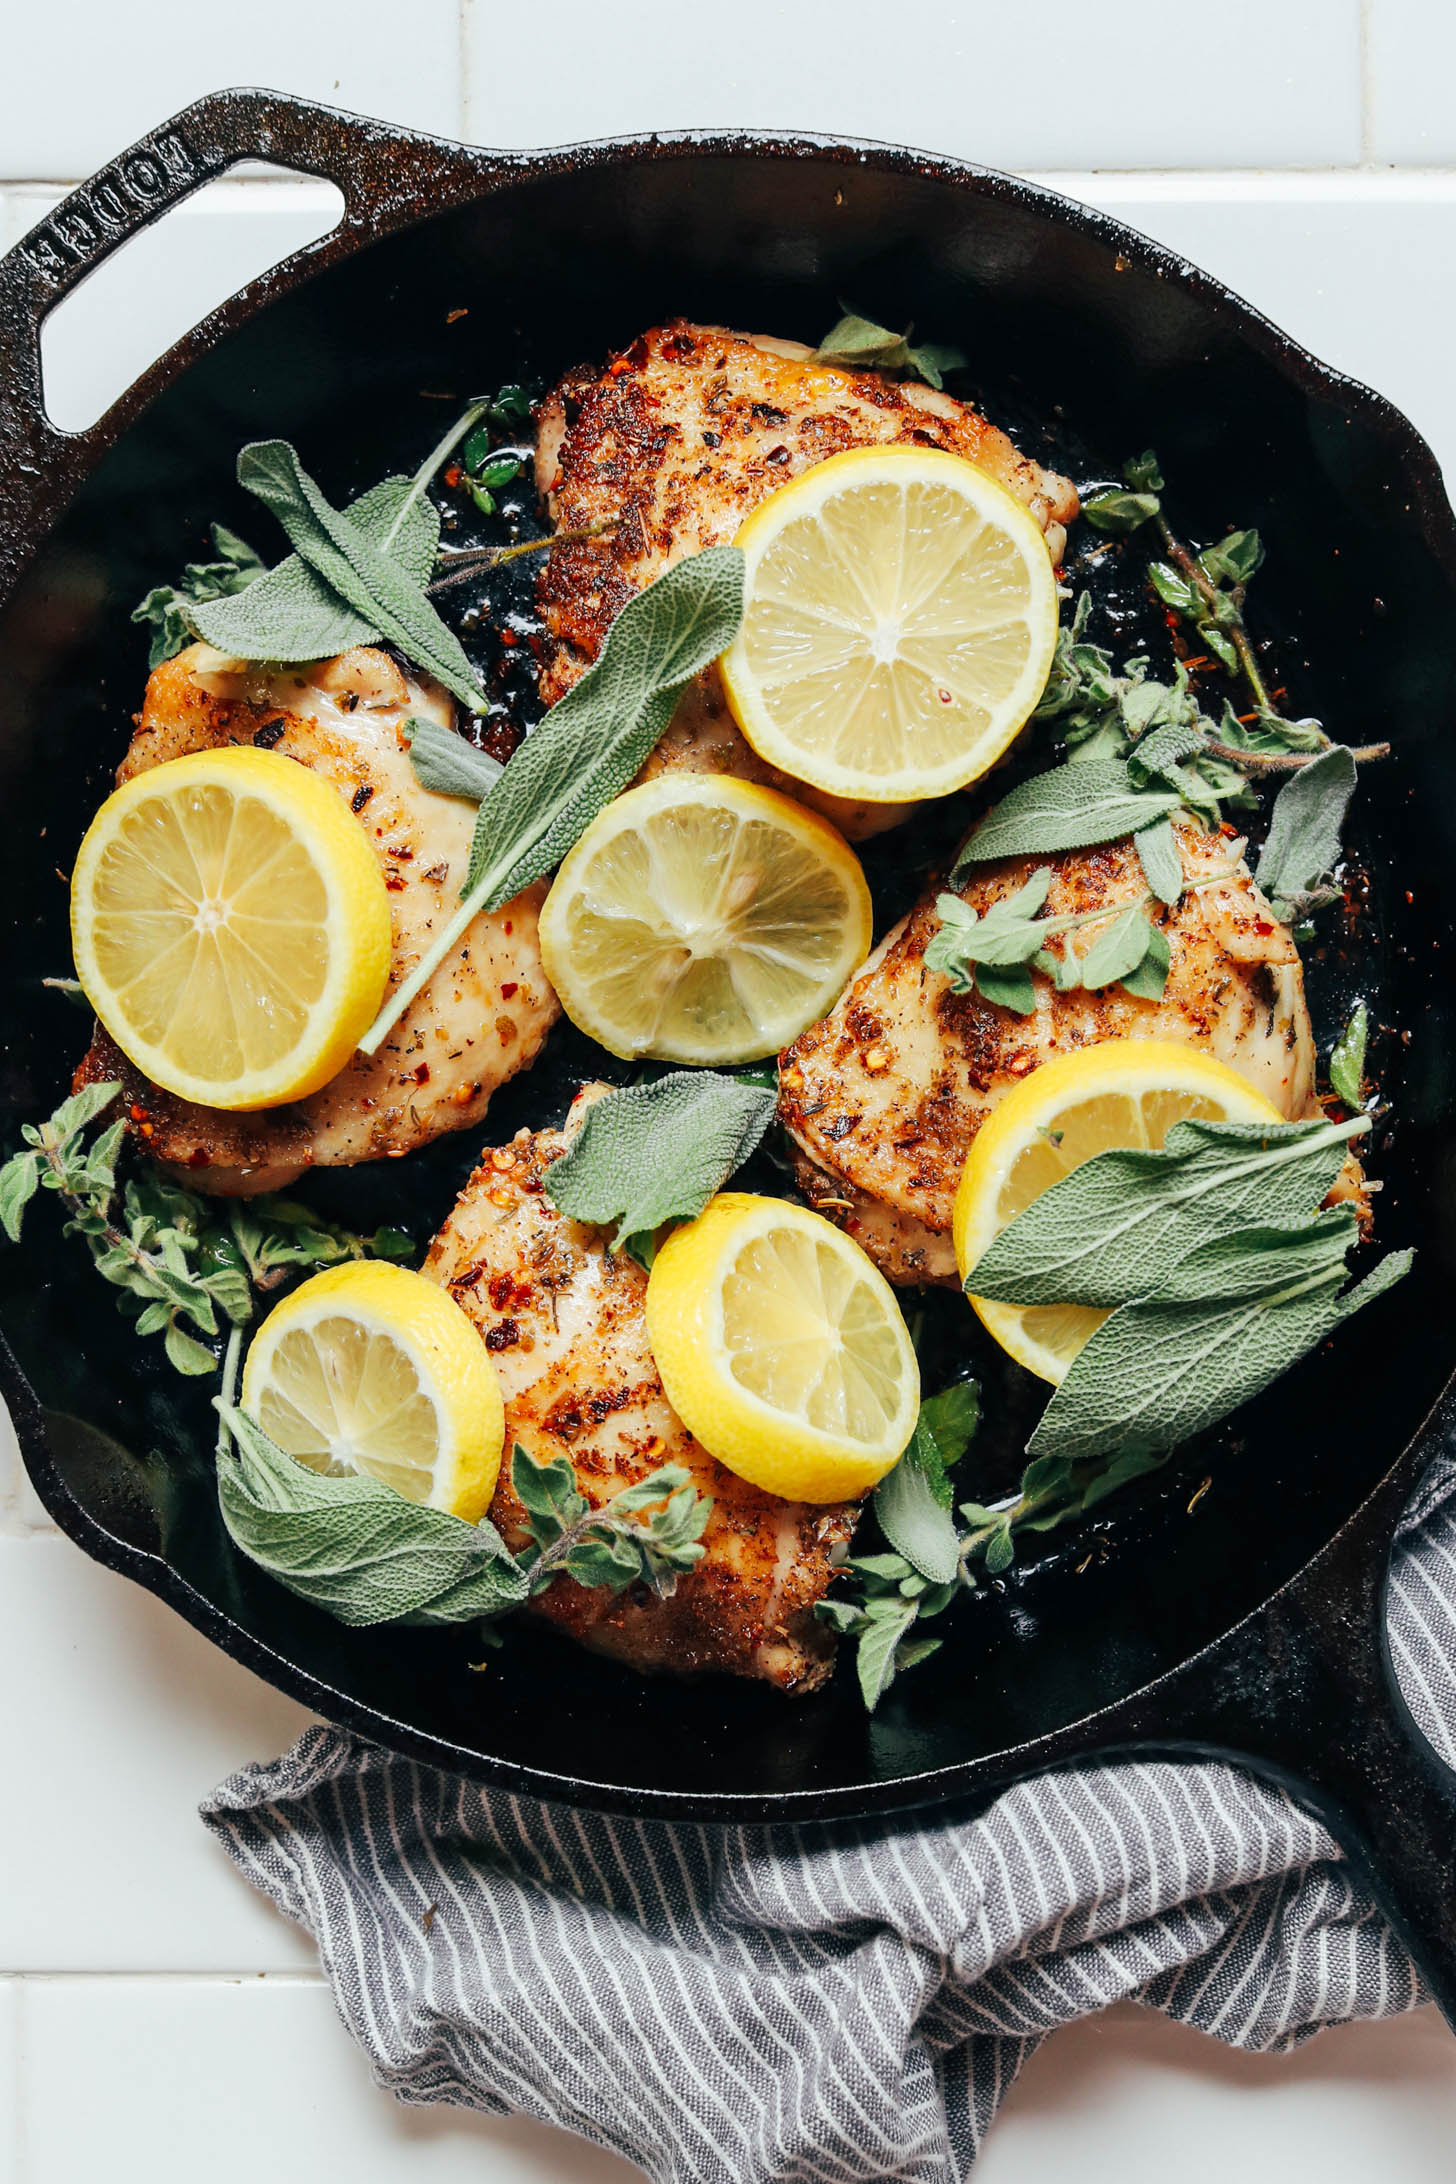 Skillet of seared chicken thighs garnished with lemon slices and herbs